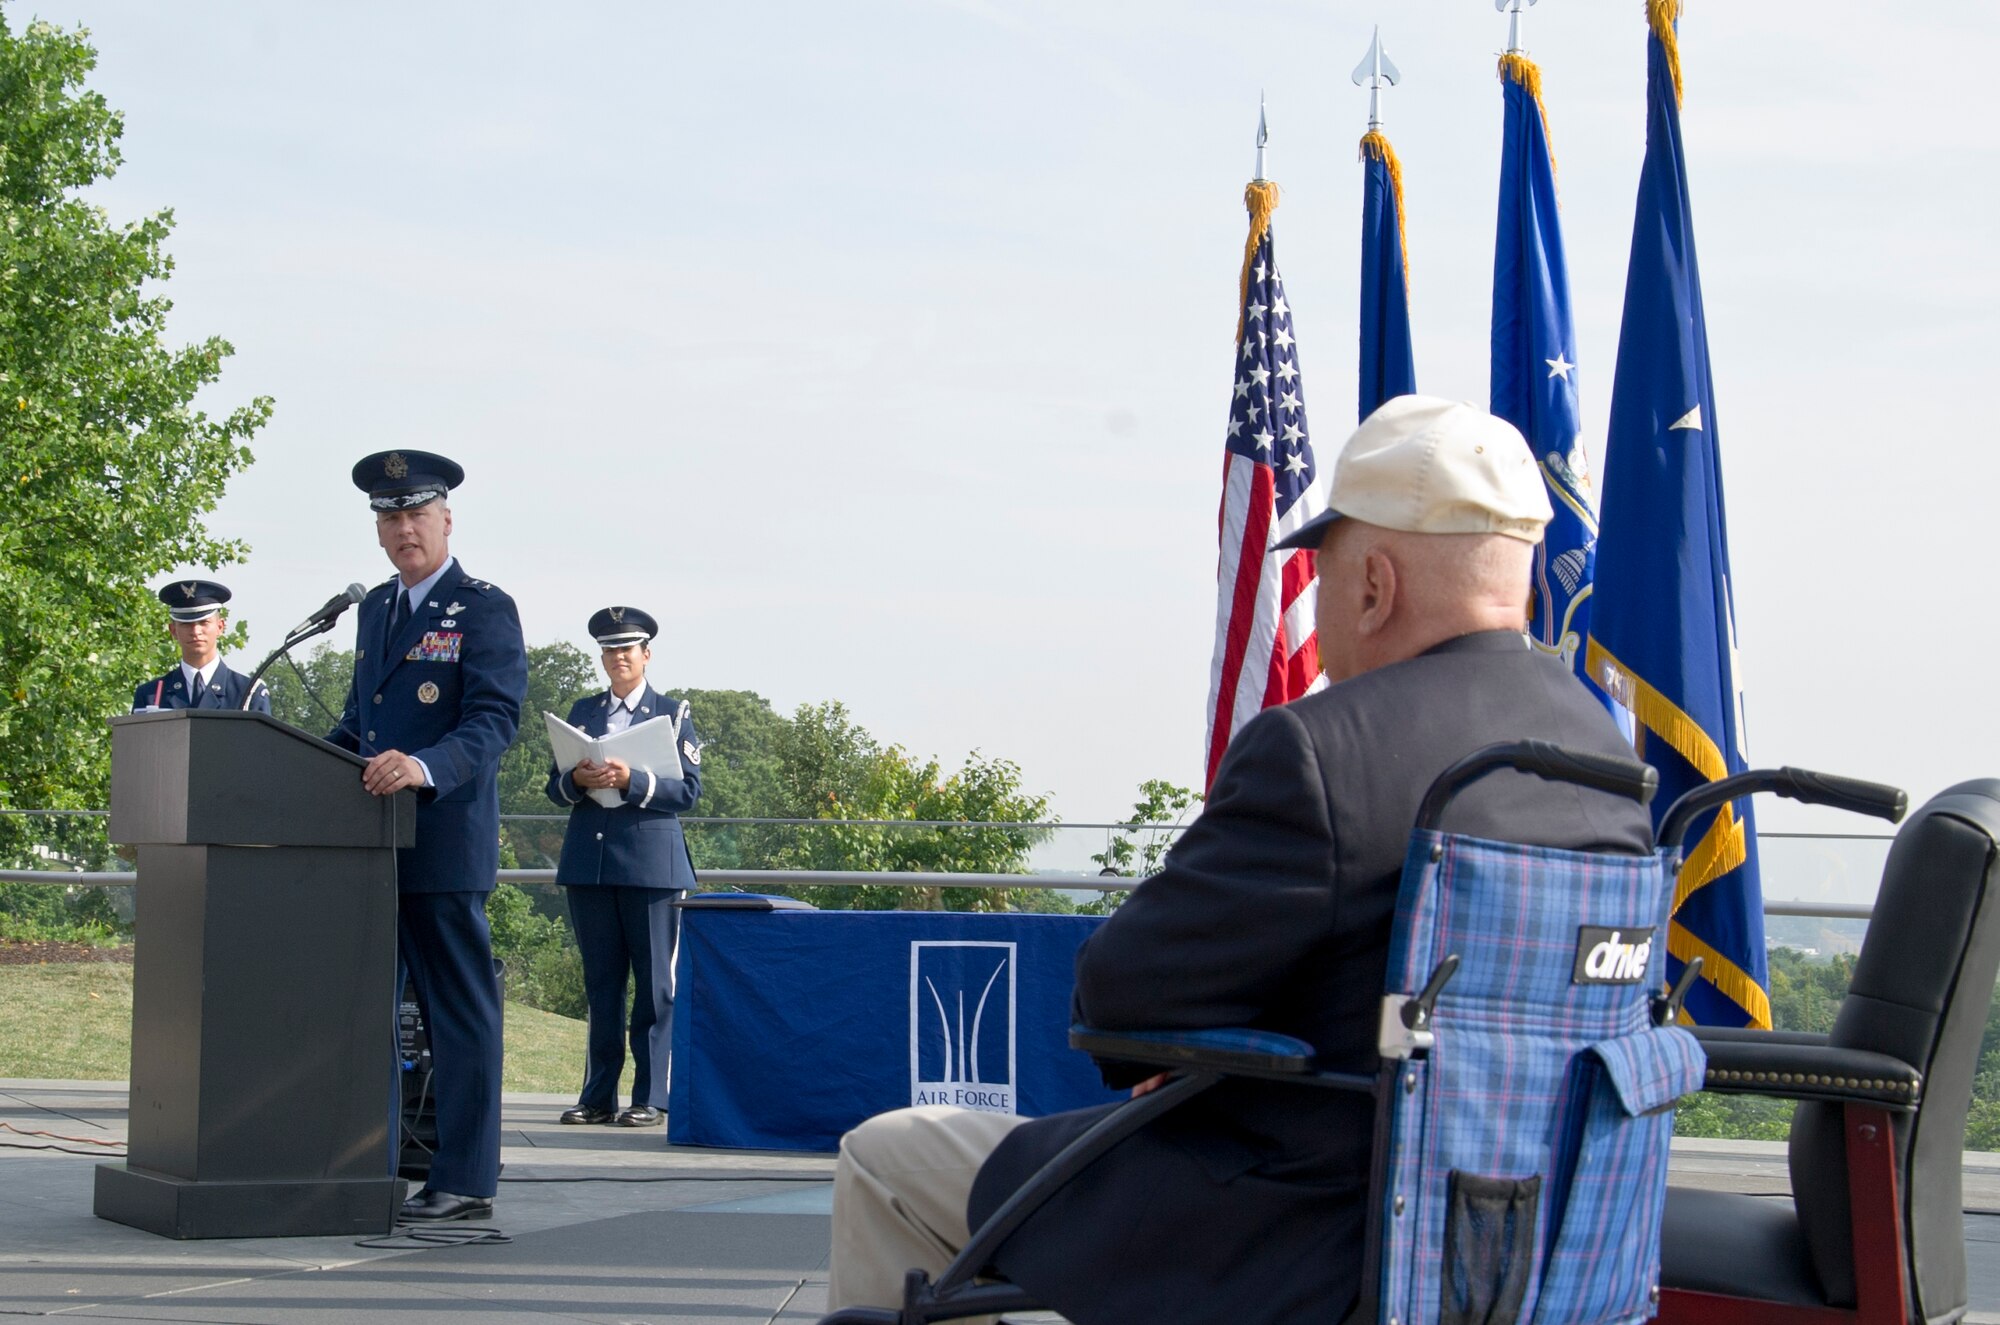 Maj. Gen. James A. Jacobson (standing at podium), Air Force District of Washington commander, delivers remarks at a Purple Heart award ceremony July 14, 2017 at the U.S. Air Force Memorial, Arlington, Va. The award was approved for World War II veteran Lt. Pedevillano (right) 72 years after he was liberated from a German prisoner of war camp by Gen. George S. Patton, Jr.’s 3rd U.S. Army. (Air Force photo by Staff Sgt. Joe Yanik)